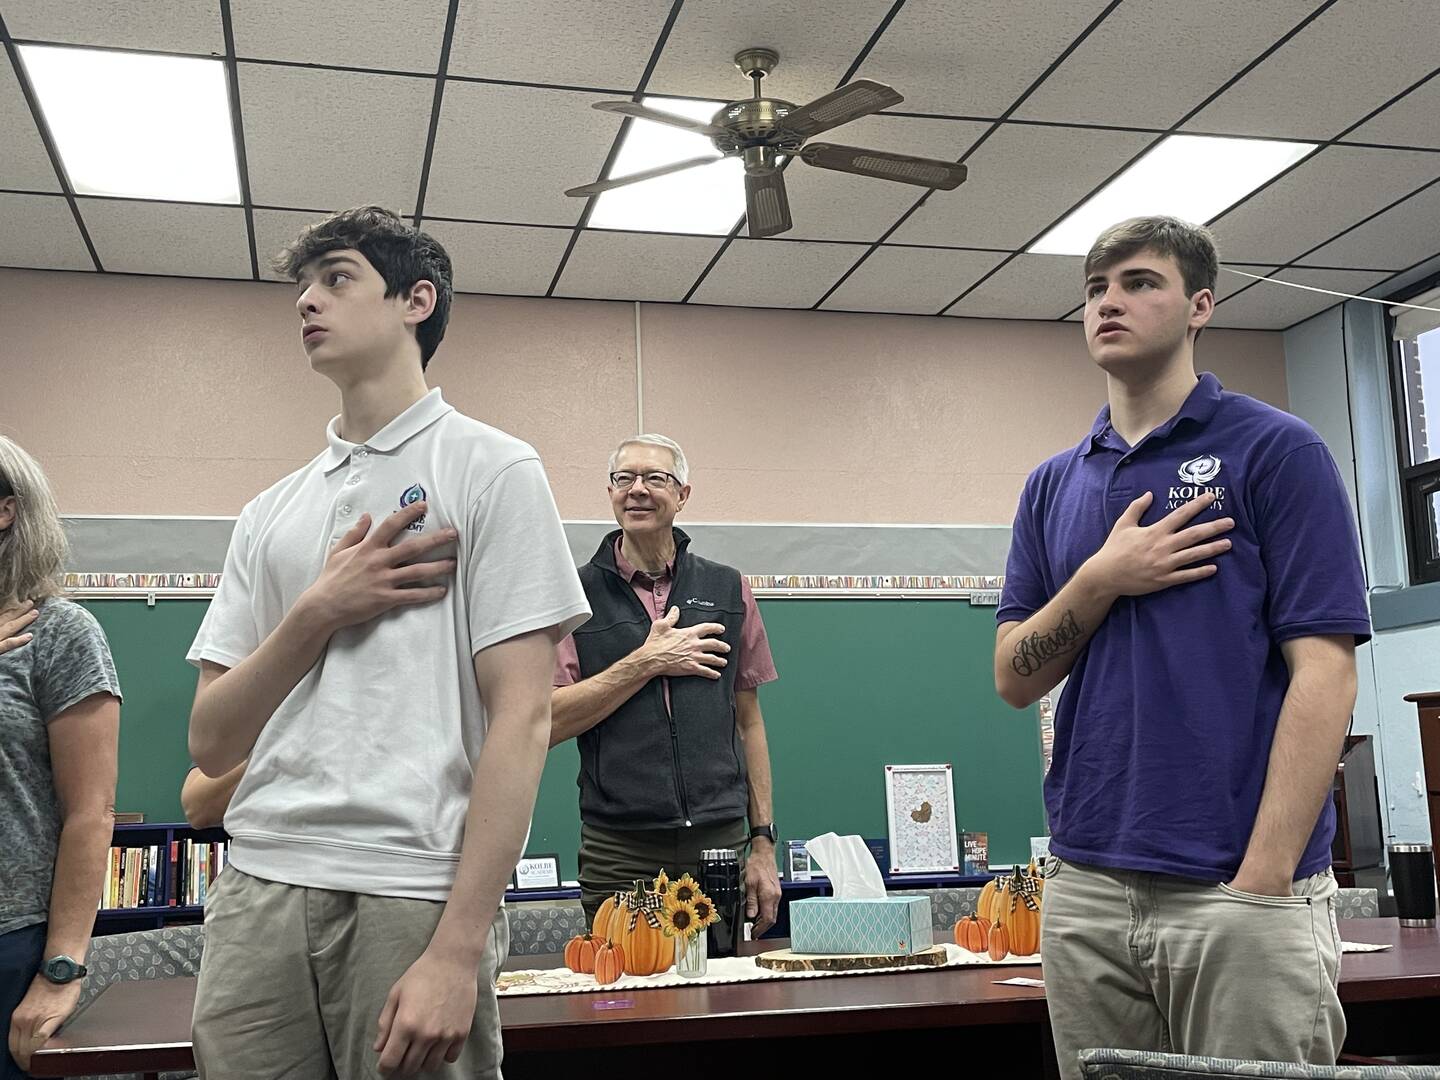 two students stand with their hands on hearts with a teacher behind them as they recite a pledge